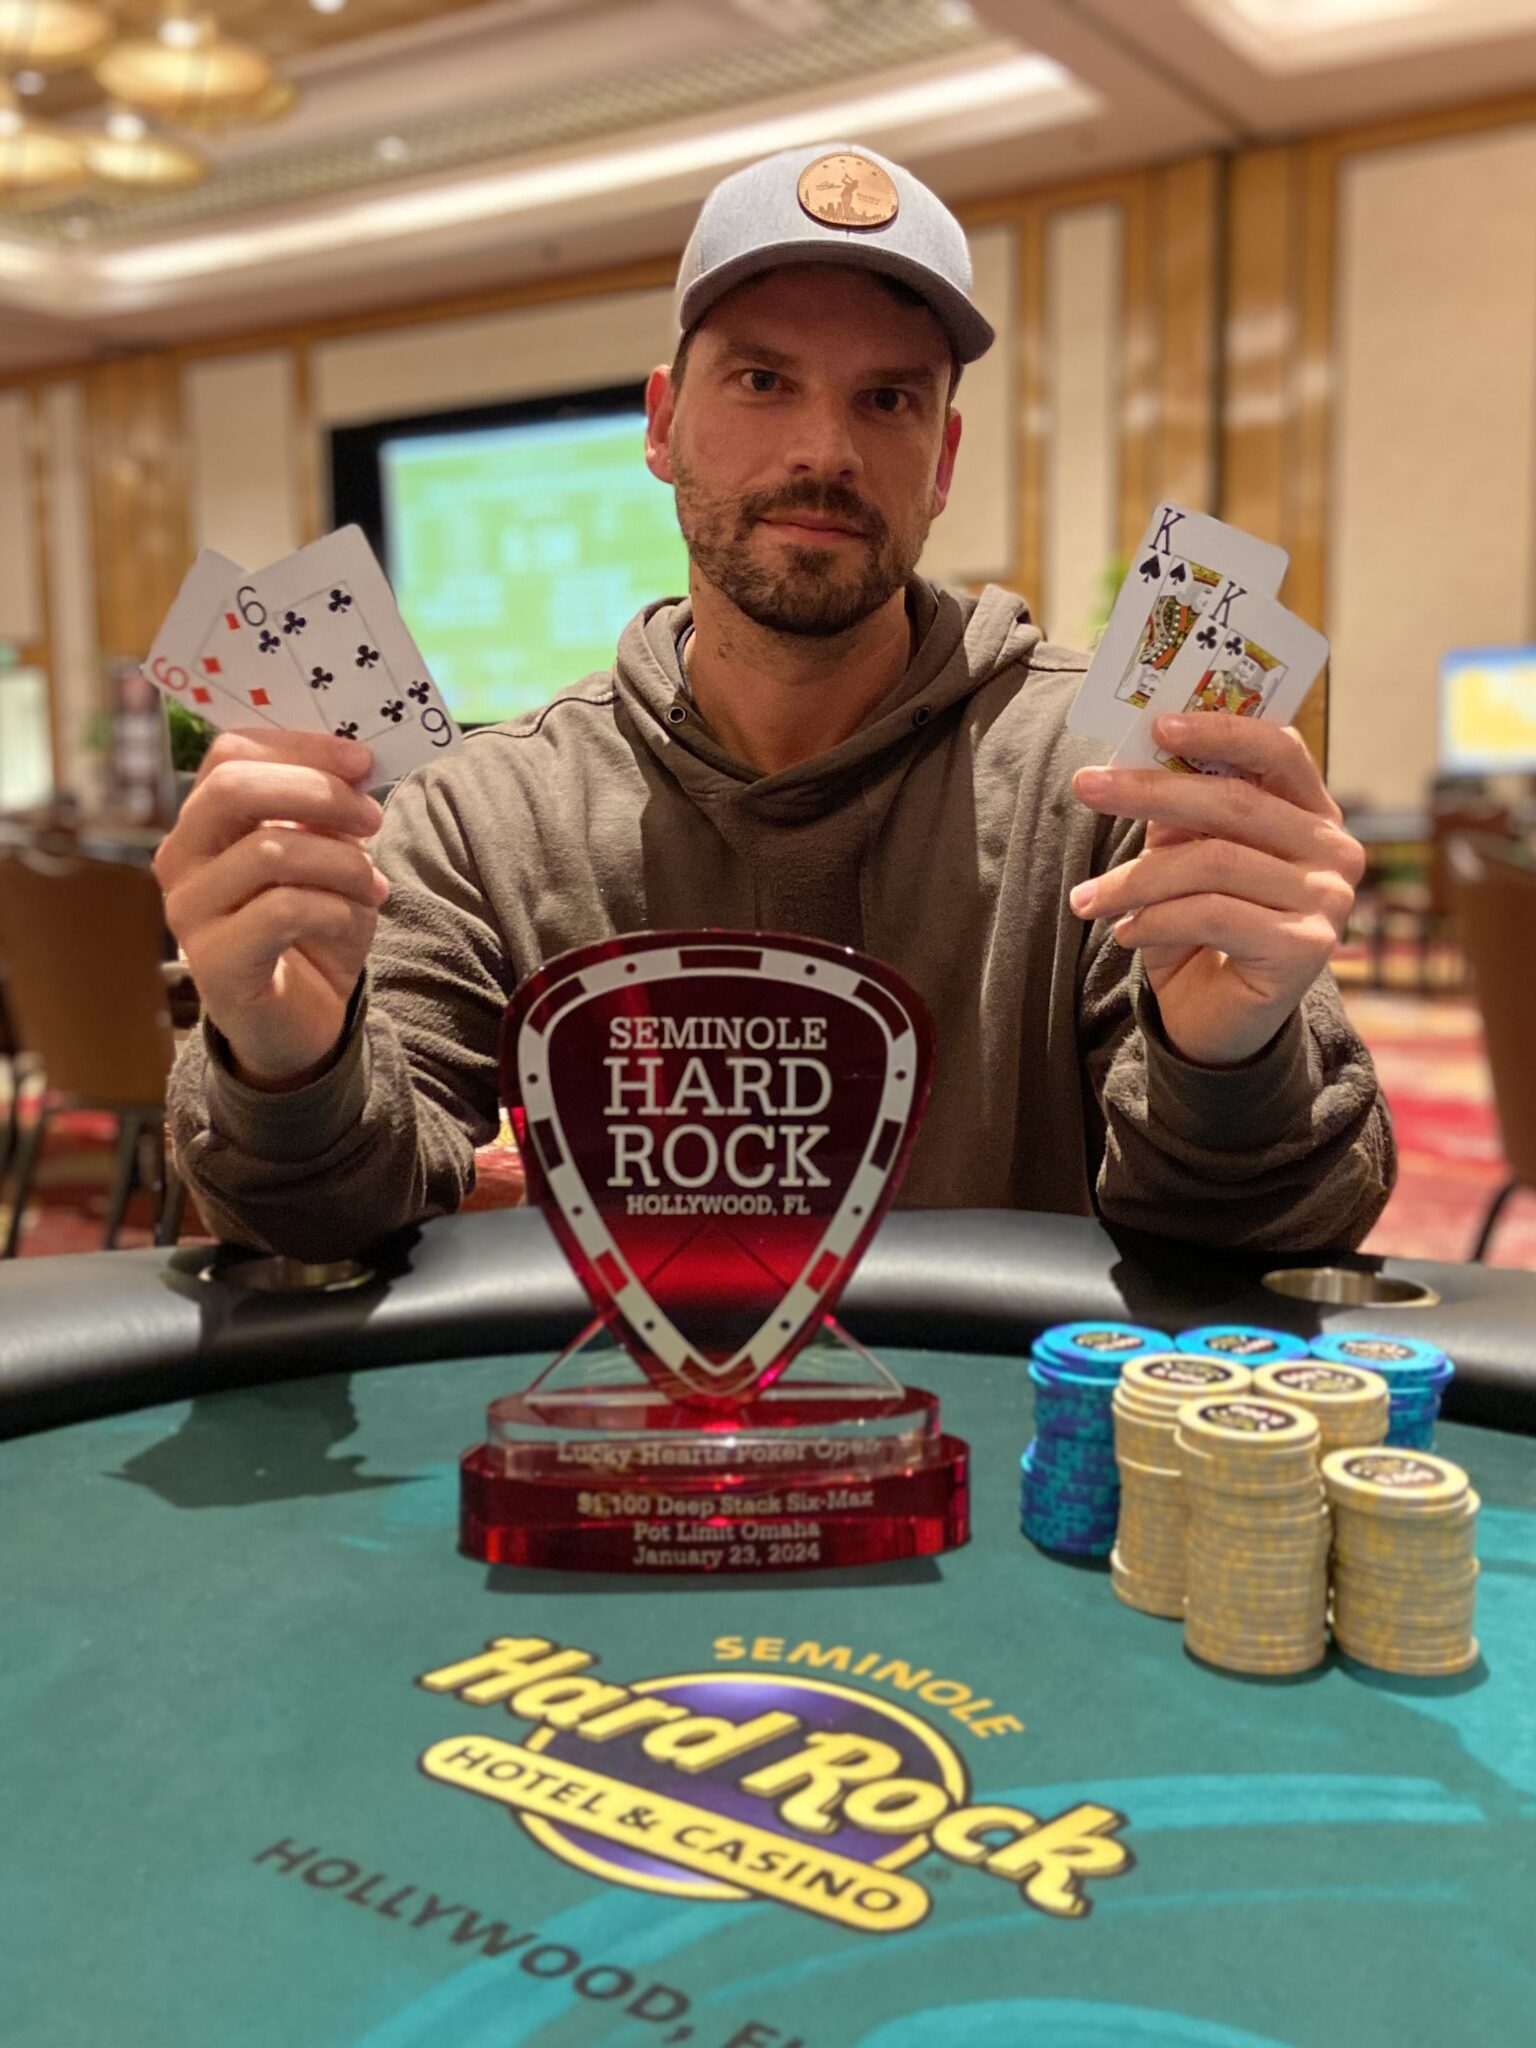 Todd Ivens Wins Event 51 of the 2024 Seminole Hard Rock Lucky Hearts